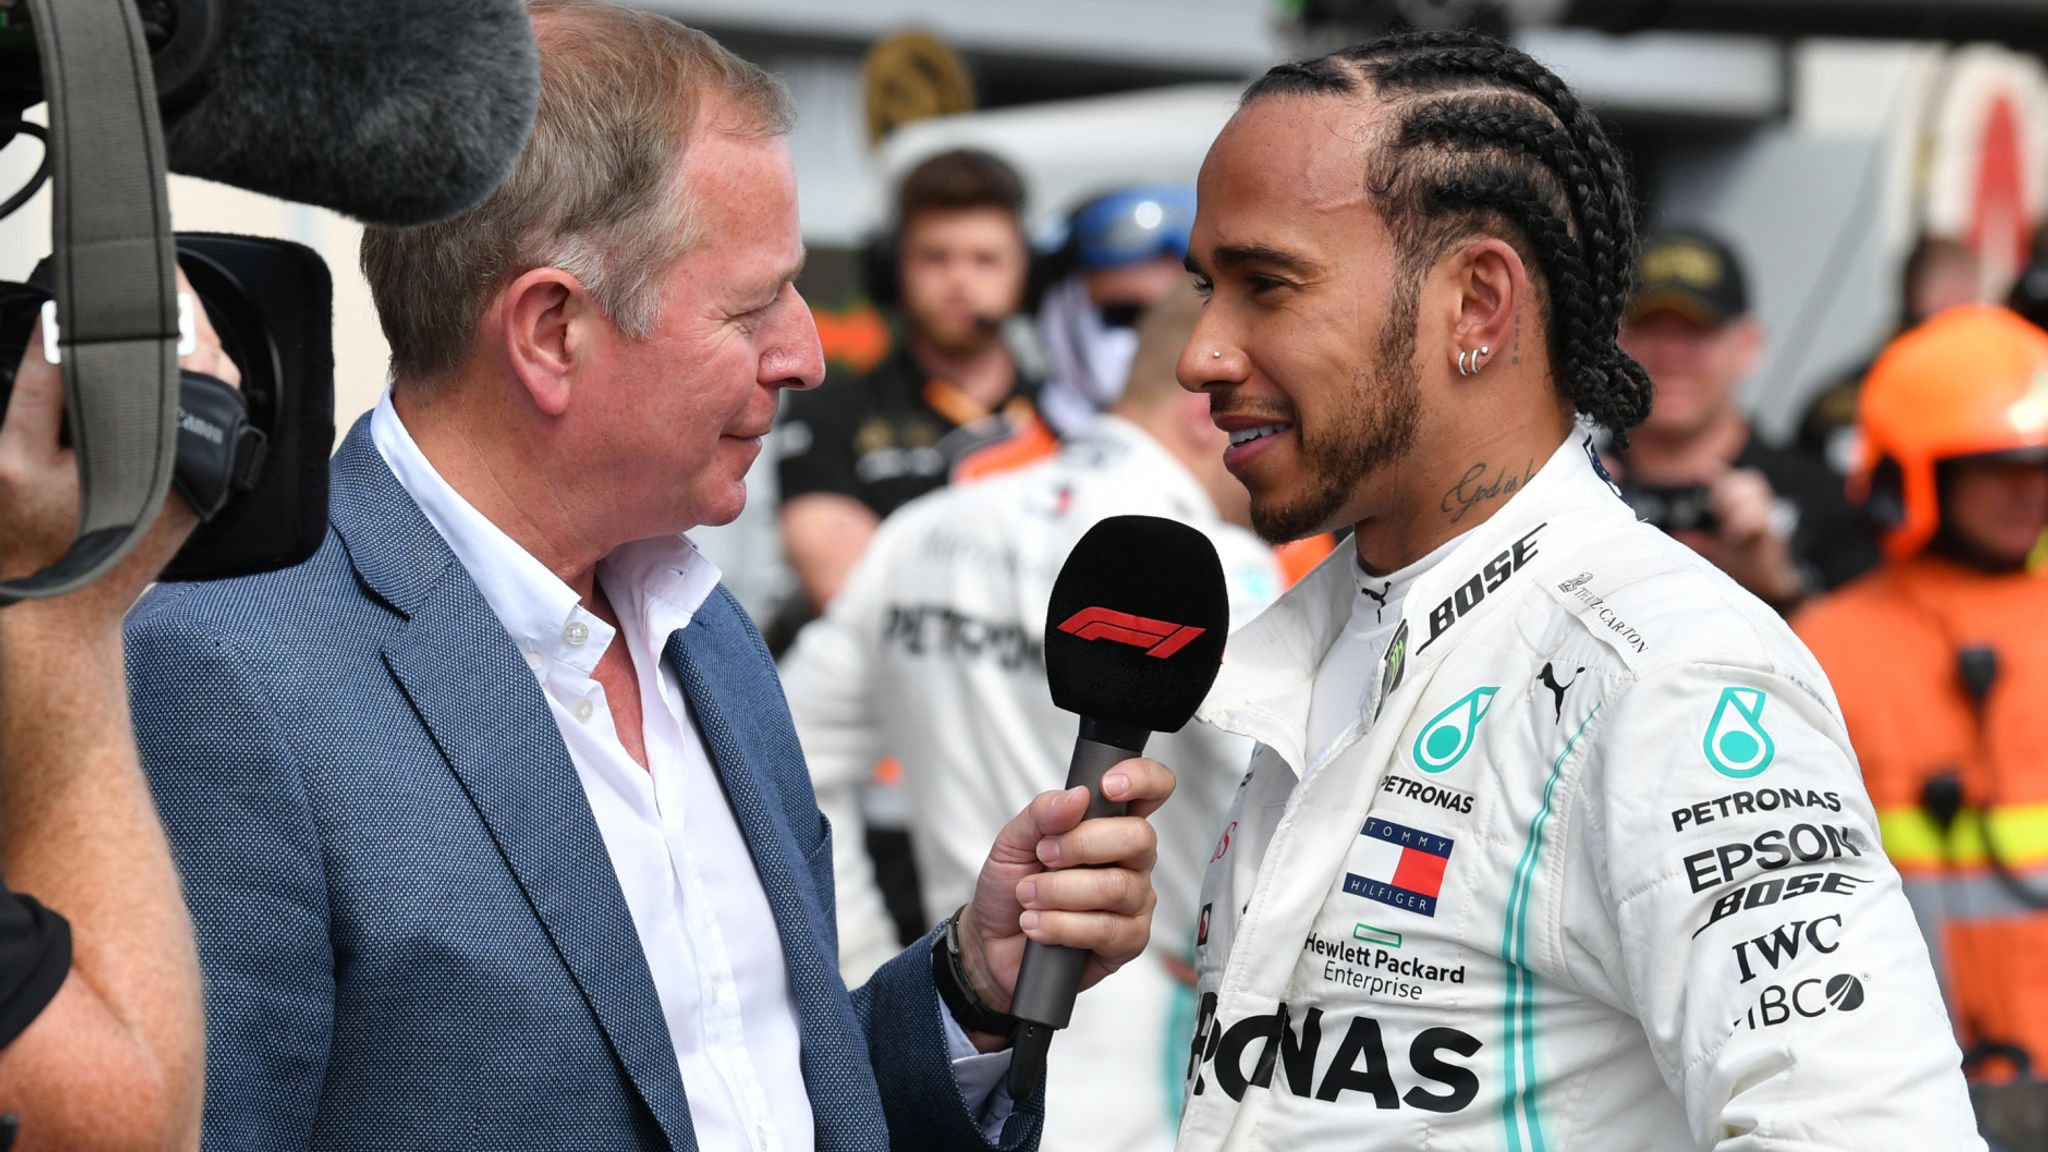 Martin Brundle on France penalties and Lewis Hamilton's masterclass | F1 News